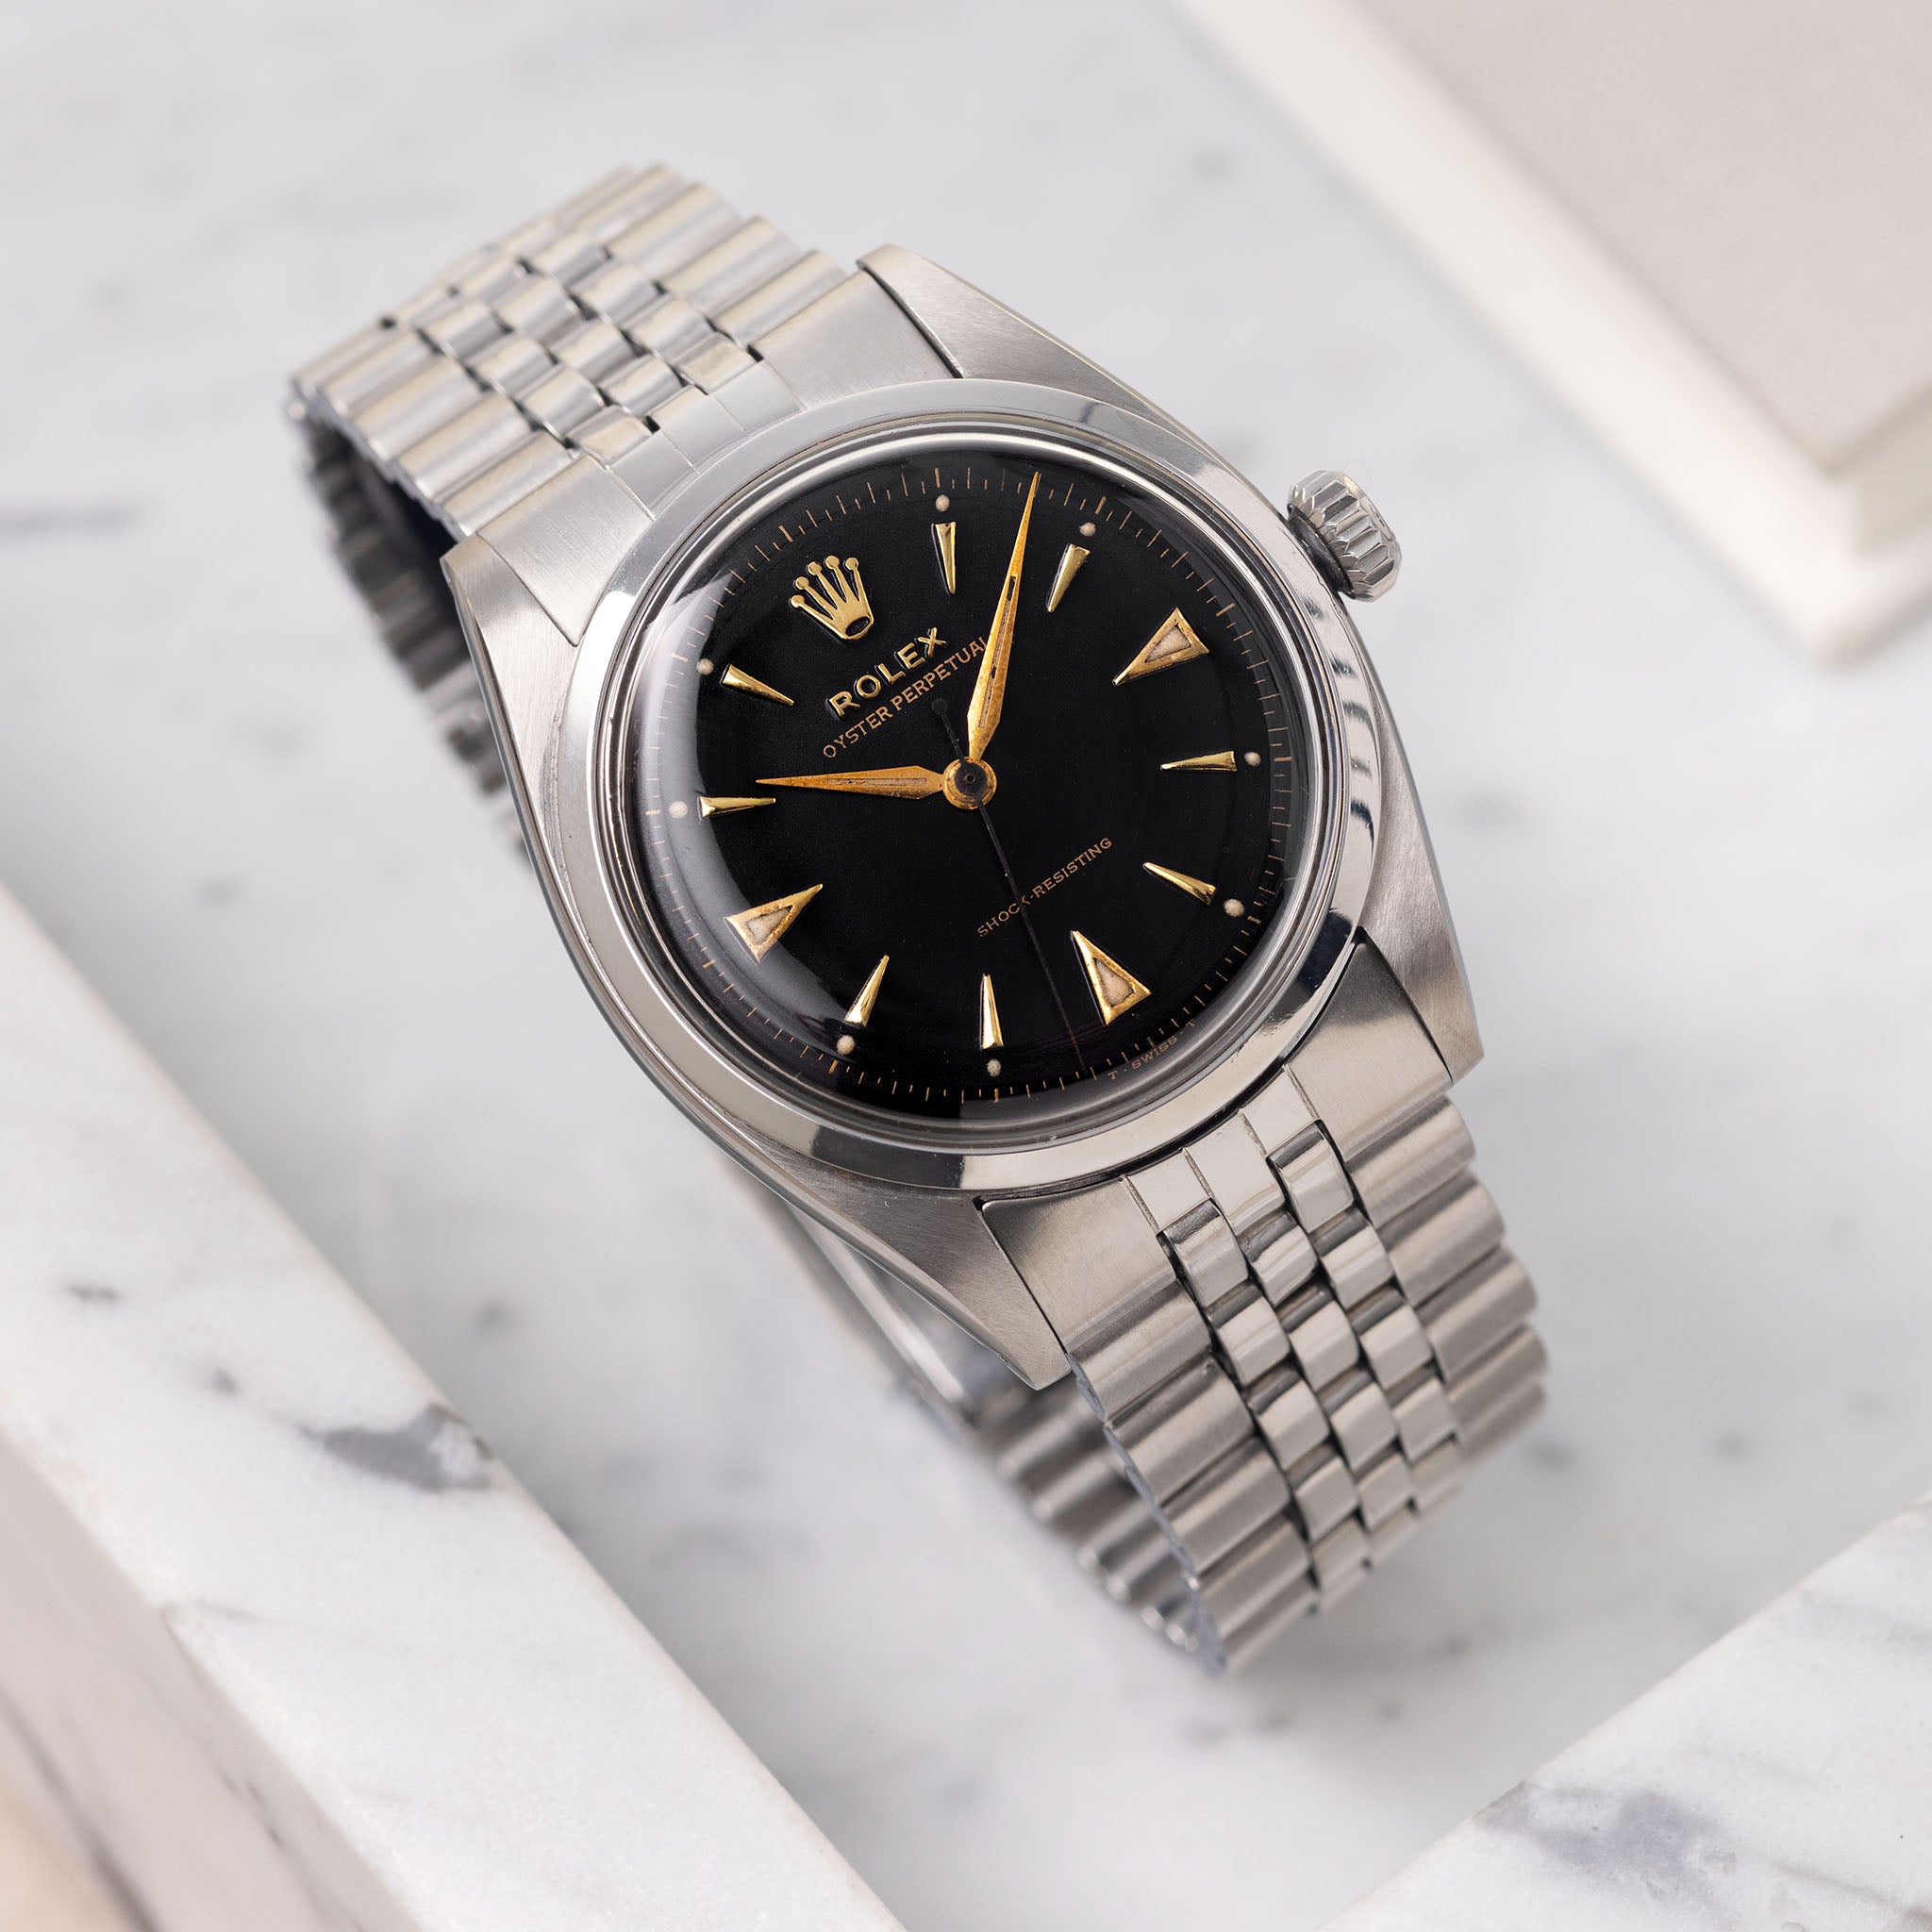 Rolex Oyster Perpetual Ovettone Black Dial Ref 6352